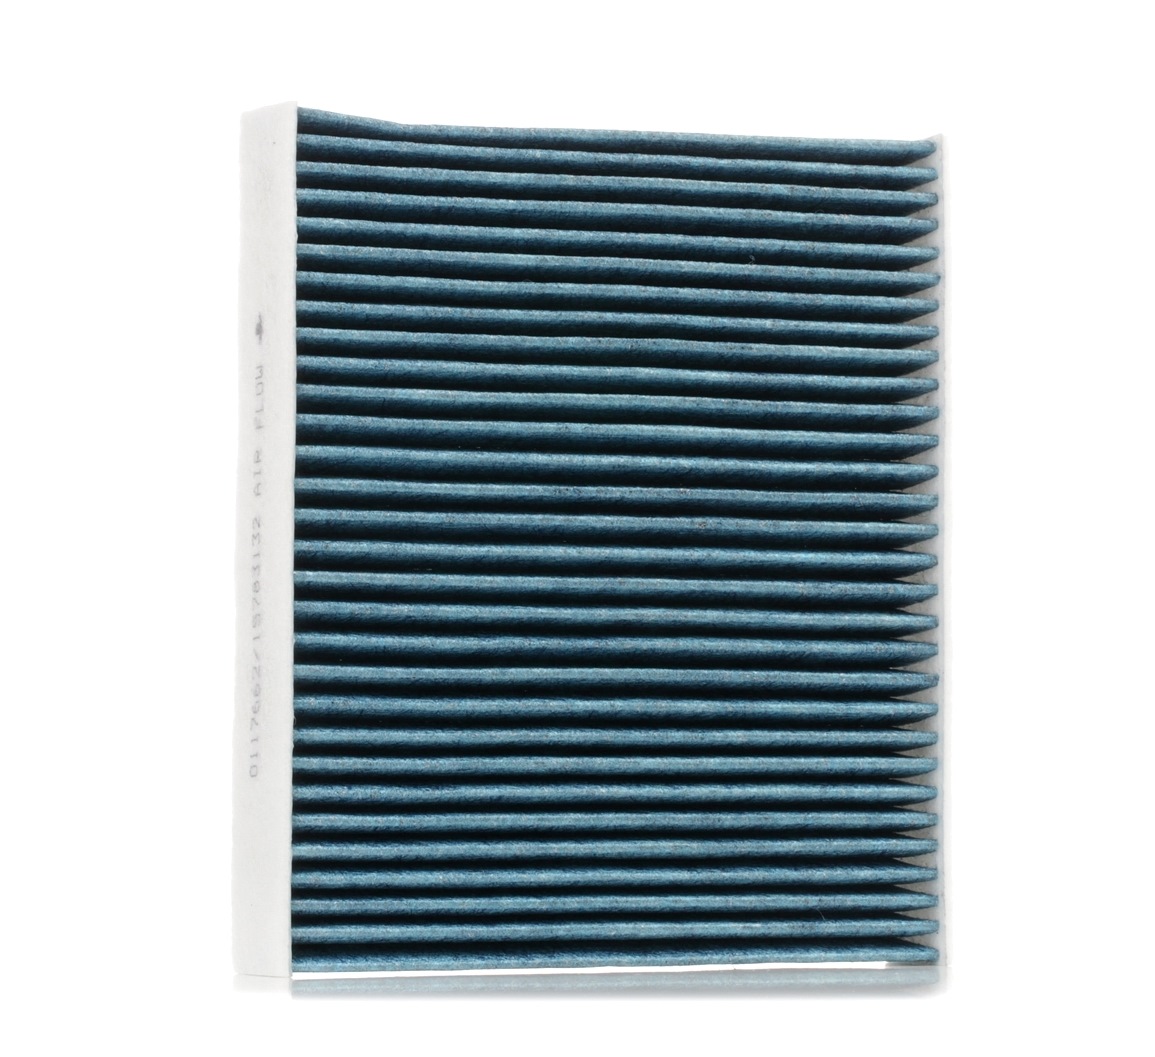 STARK Activated Carbon Filter with polyphenol, with antibacterial action, Particulate filter (PM 2.5), with fungicidal effect, 240 mm x 210,5 mm x 35 mm, Activated Carbon Width: 210,5mm, Height: 35mm, Length: 240mm Cabin filter SKIF-0170512 buy